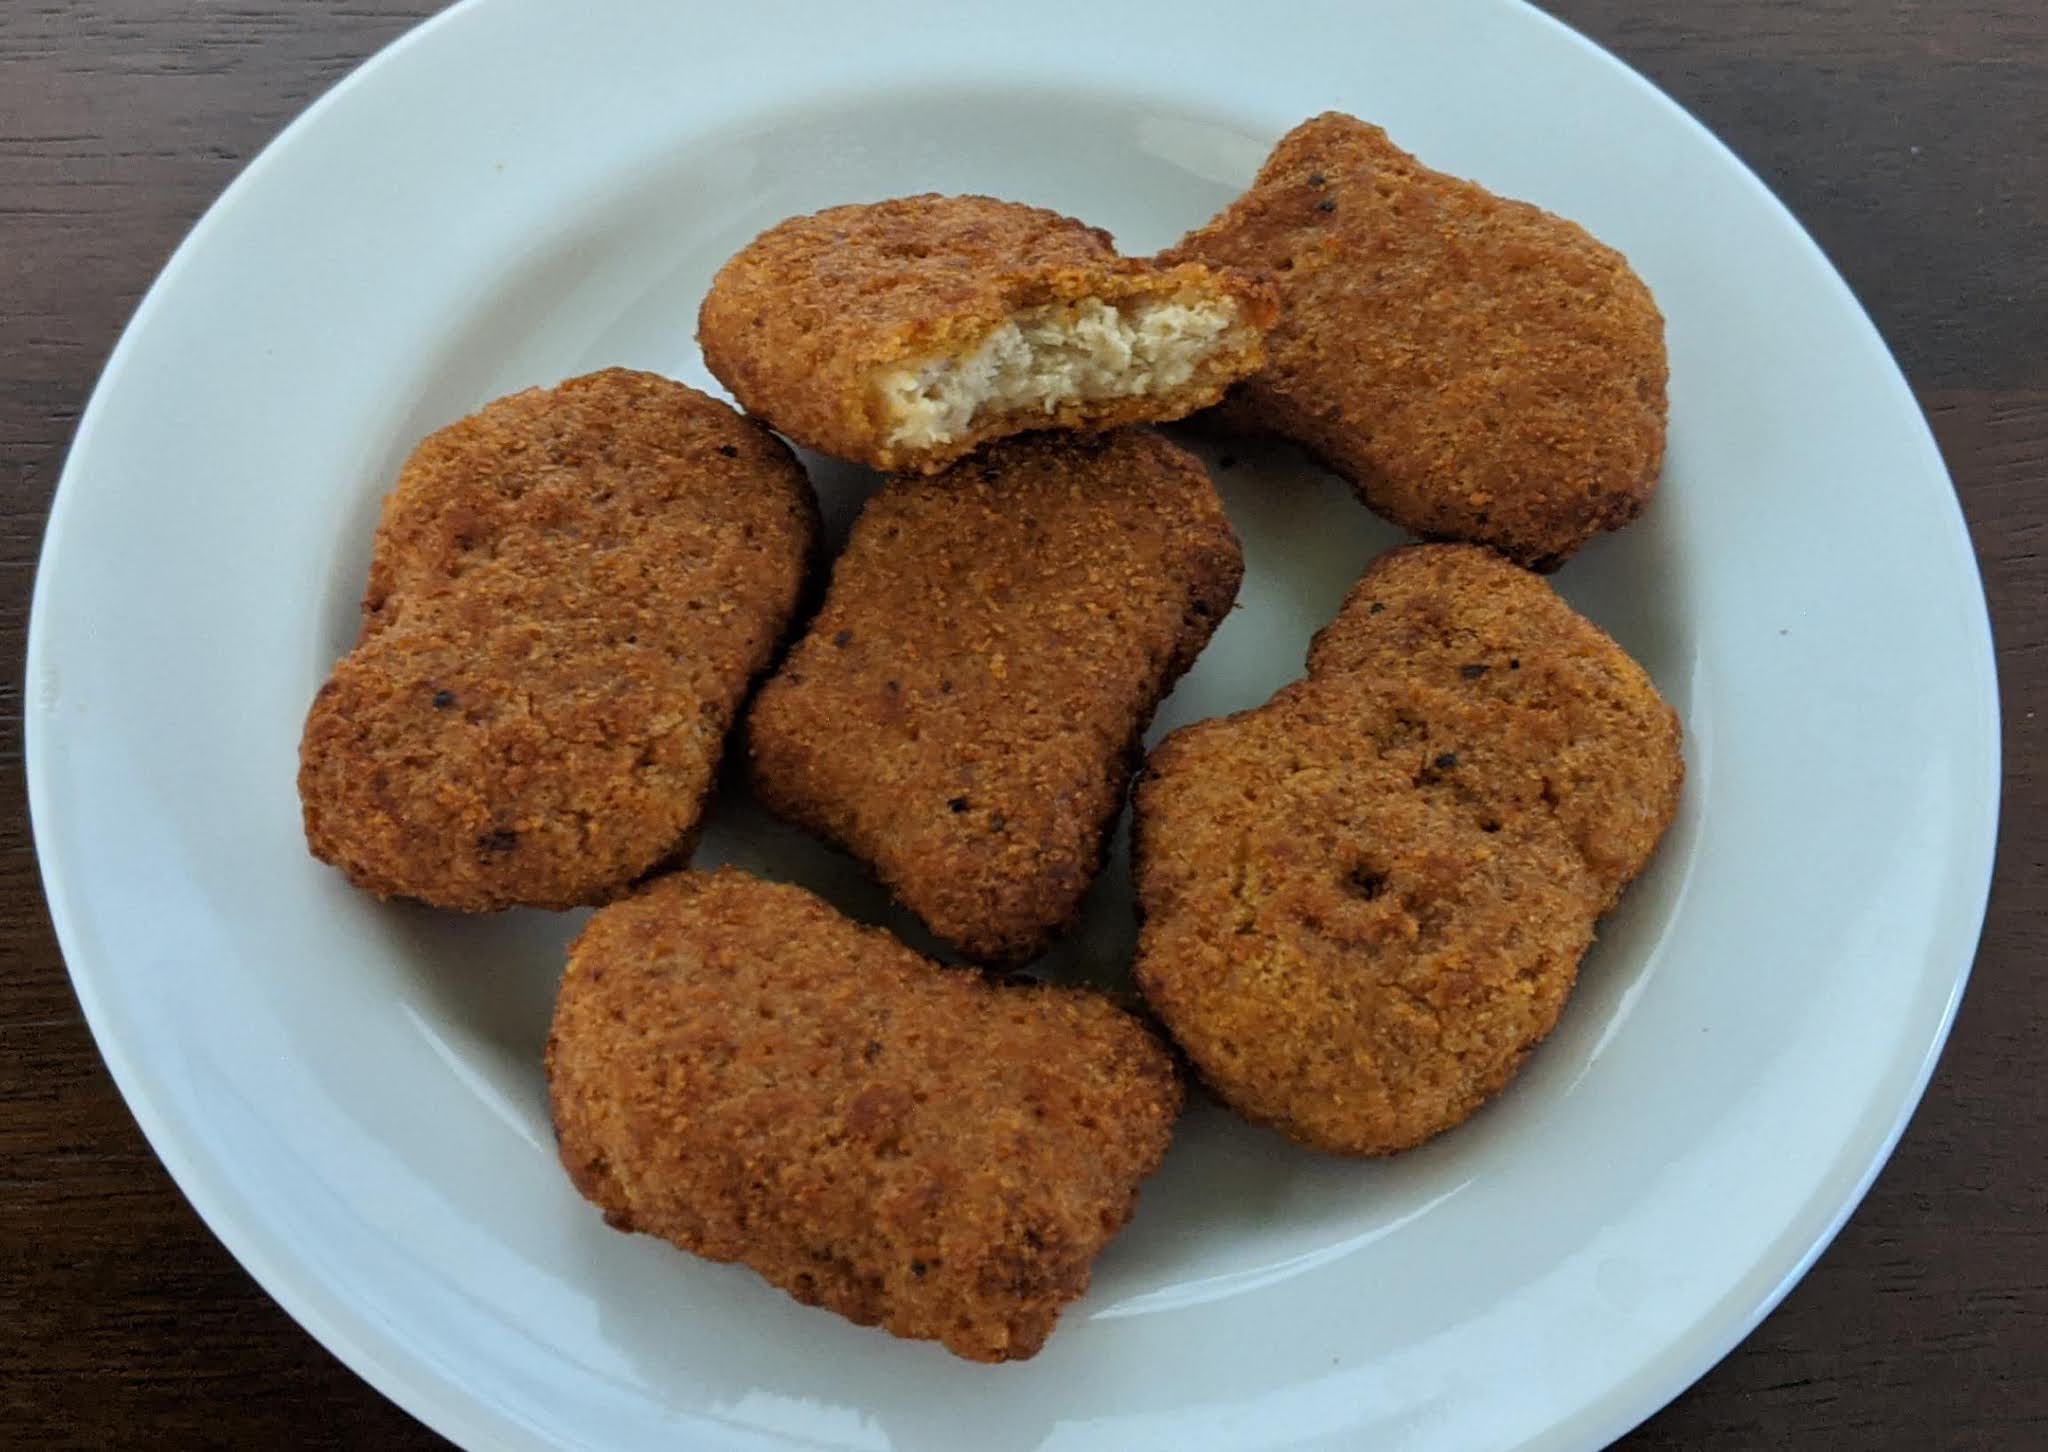 Vegan Adjacent: Review: NUGGS Spicy Plant-Based Nuggets